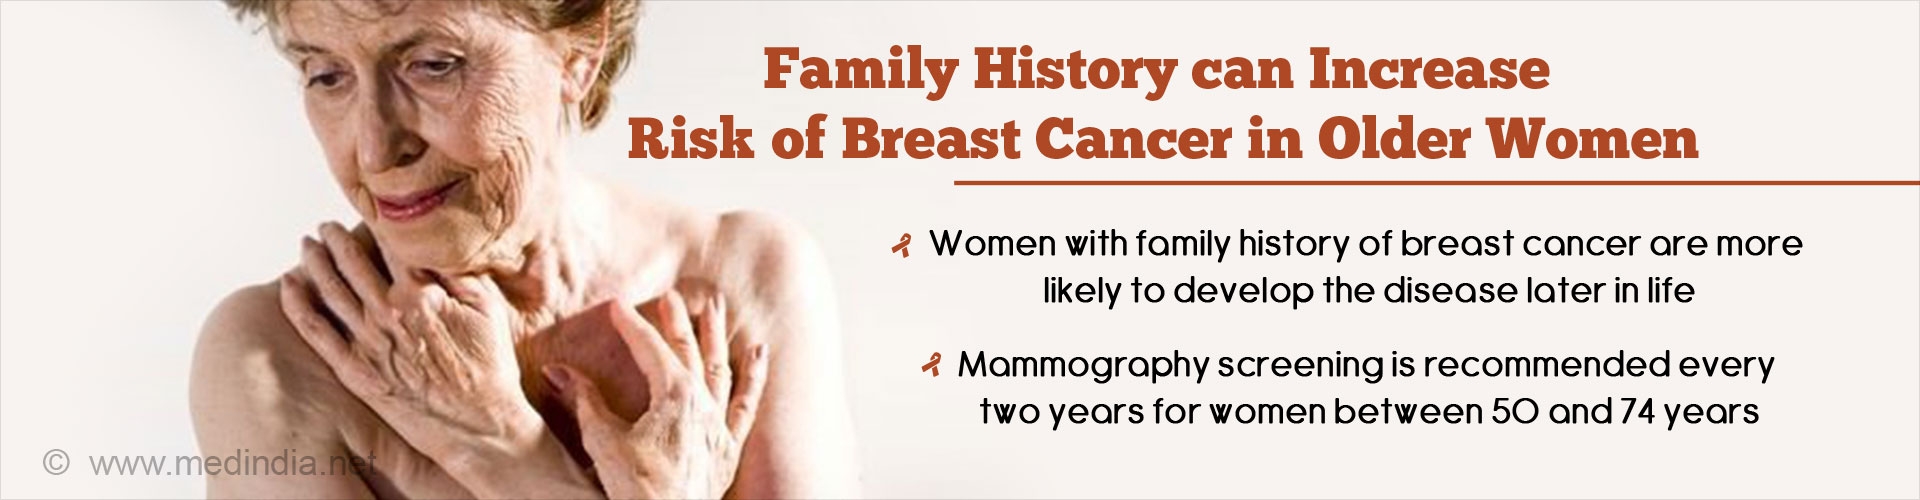 family history can increase risk of breast cancer in older women
- women with family of breast cancer are more likely to develop the disease later in life
- mammography screening is recommended every two year for women between 50 and 74 years